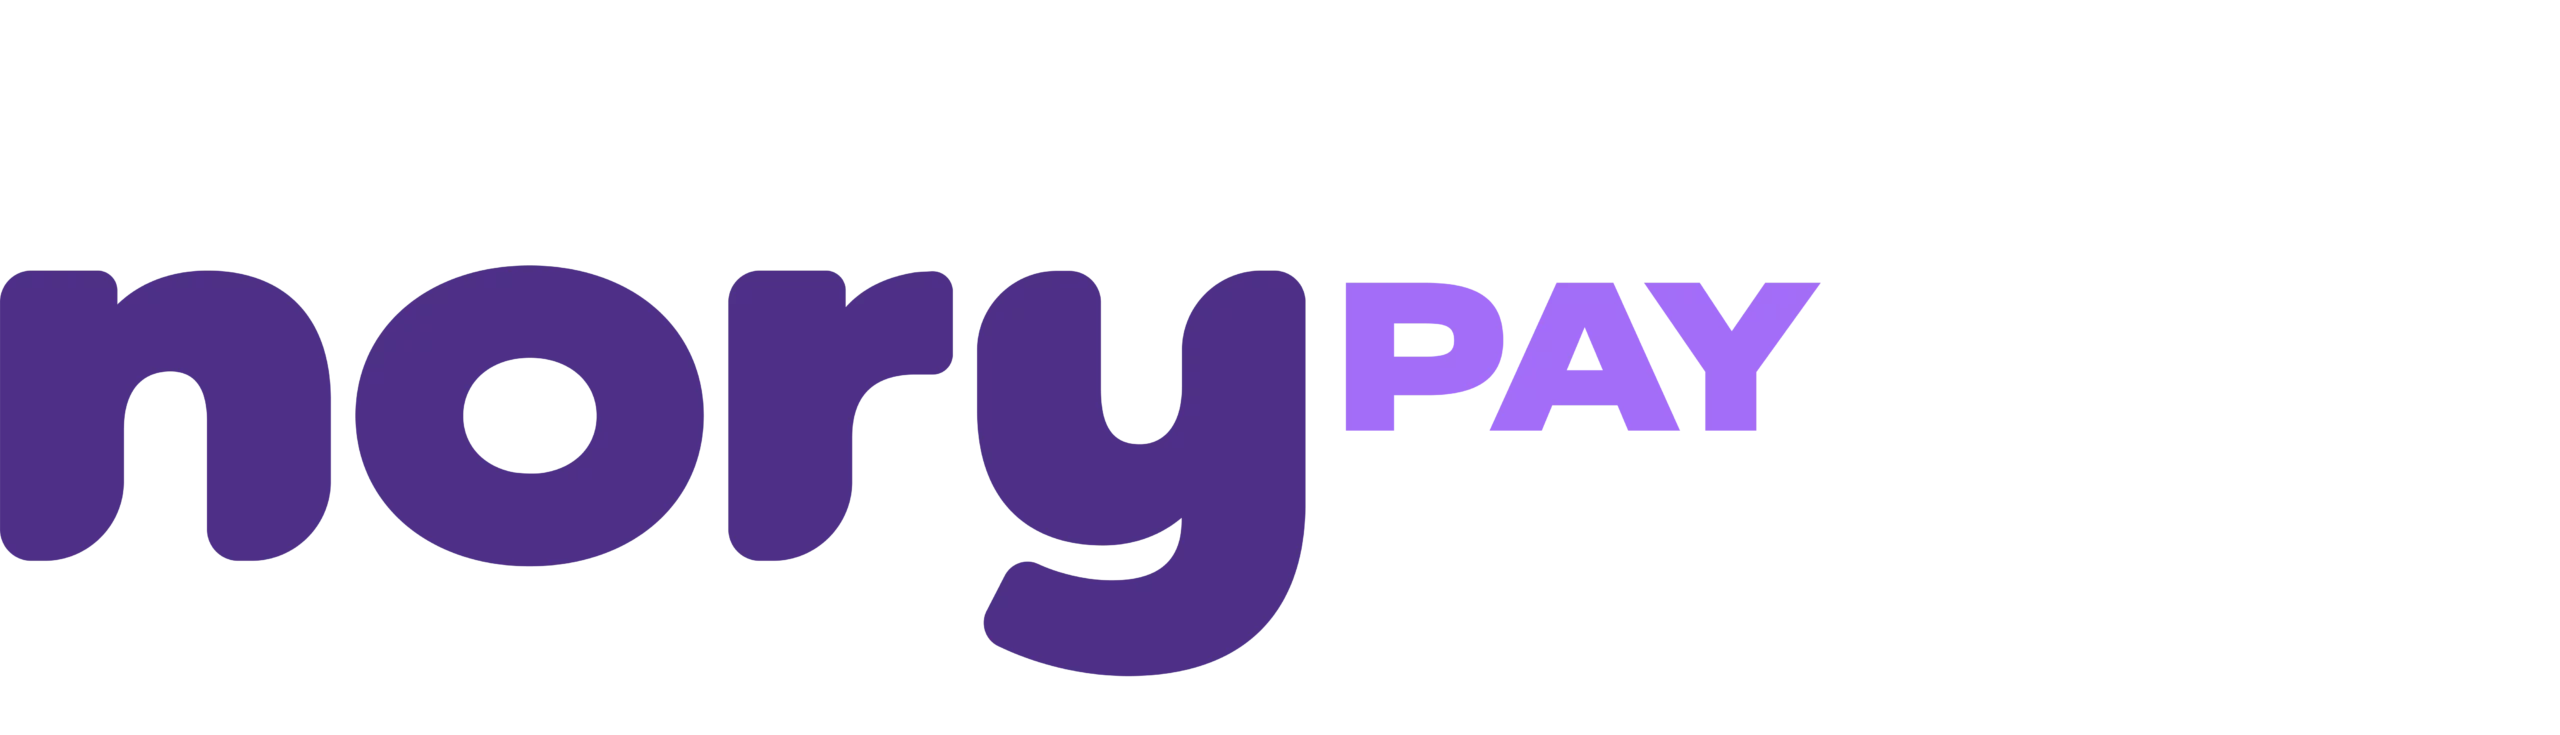 Introducing Nory Pay: The Automated Hospitality Payroll Solution